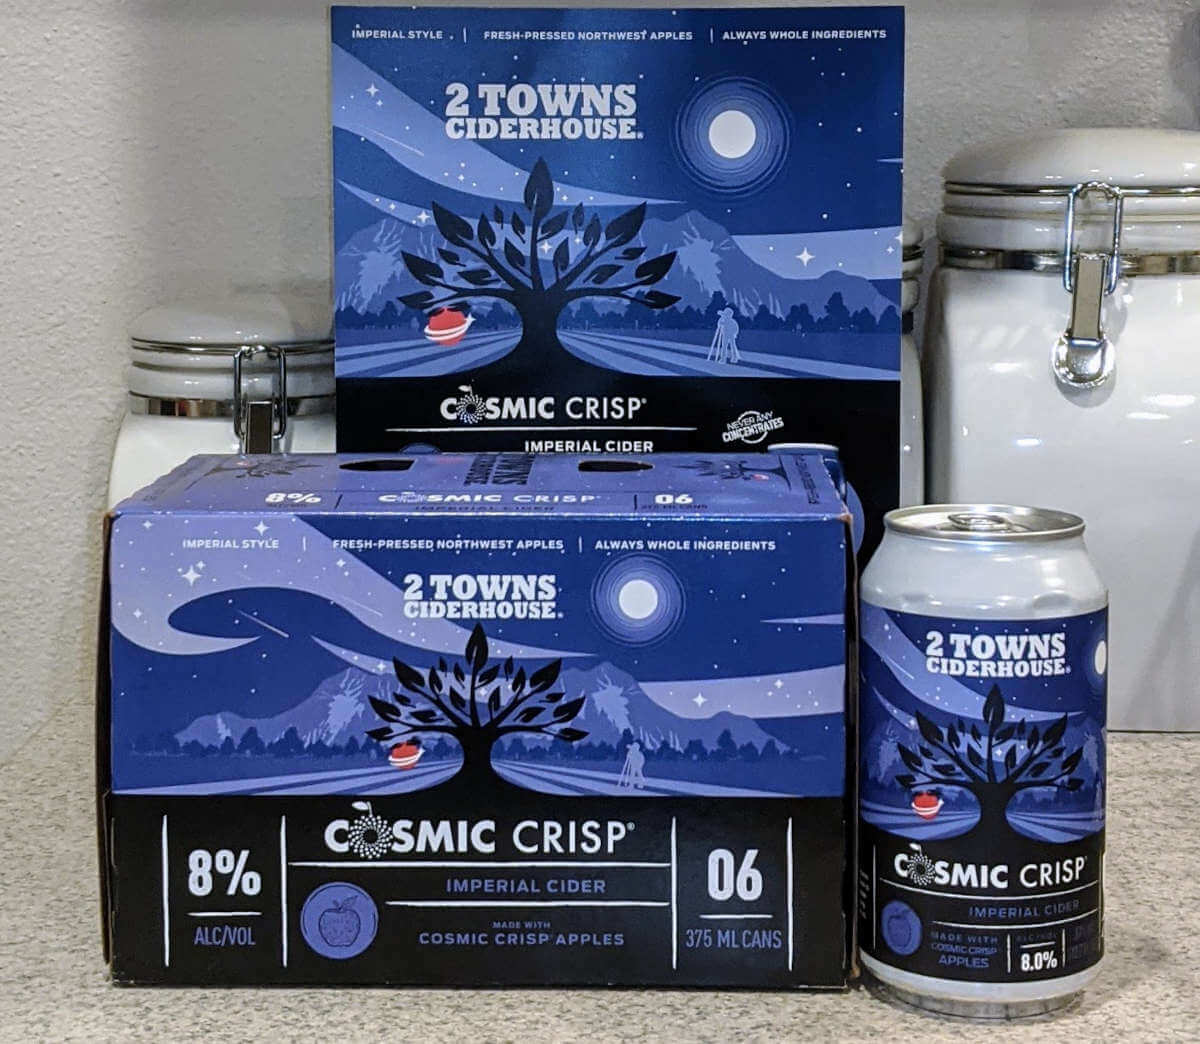 2 Towns Ciderhouse releases its first canned imperial cider, Cosmic Crisp® (received)